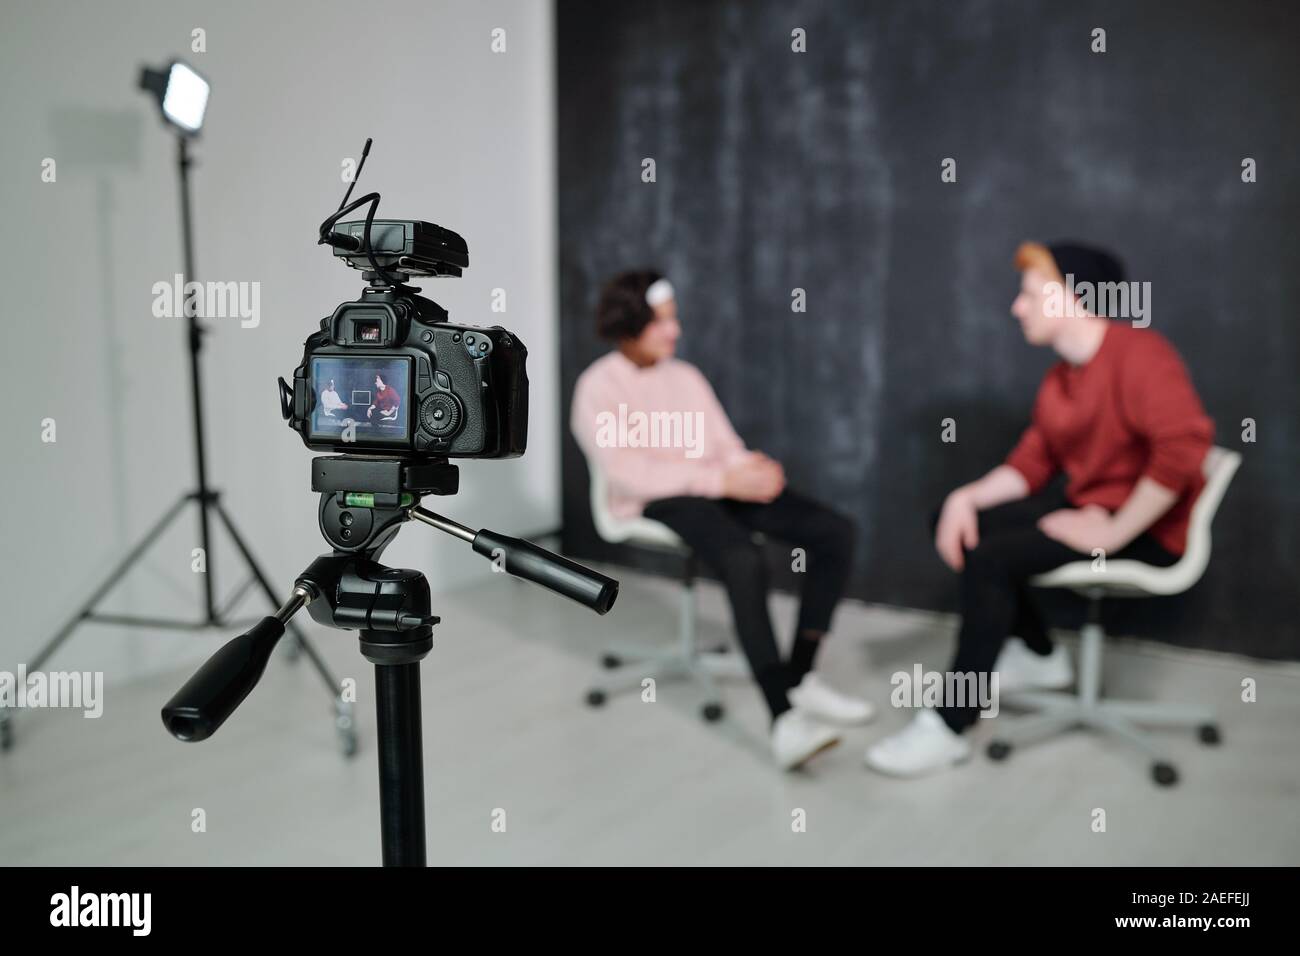 Screen of digital video camera with two vloggers having conversation in studio Stock Photo